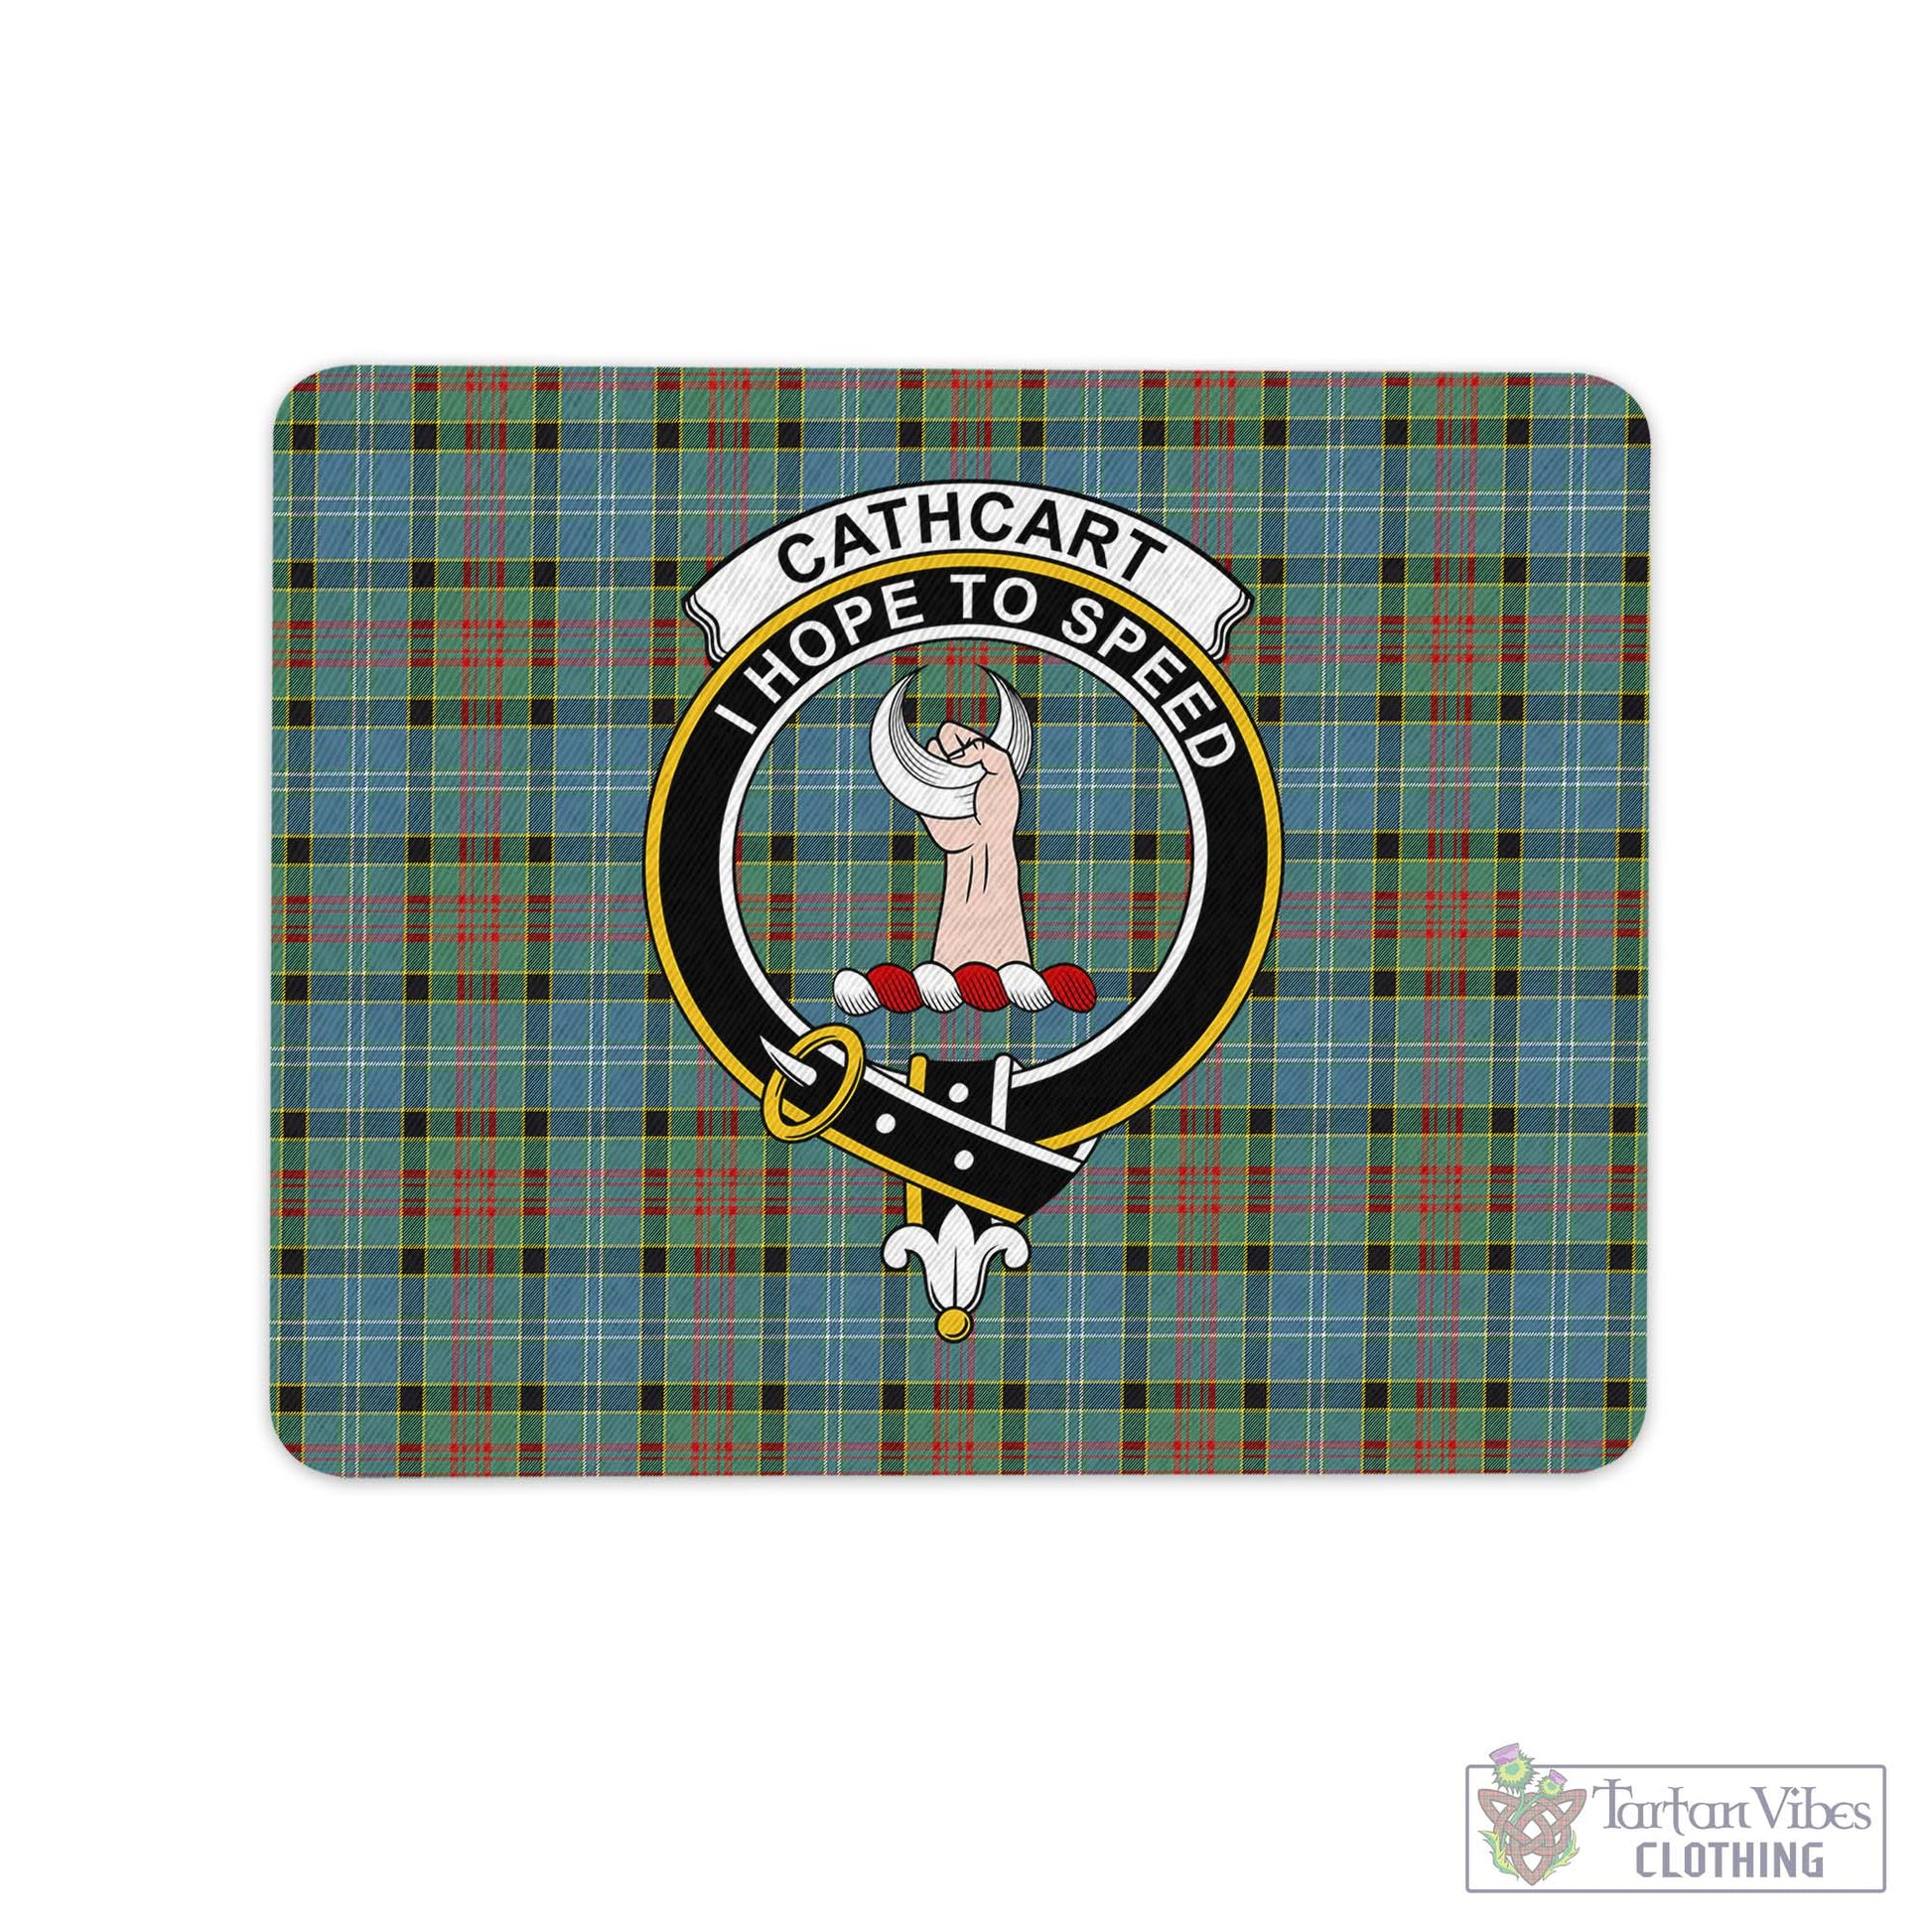 Tartan Vibes Clothing Cathcart Tartan Mouse Pad with Family Crest